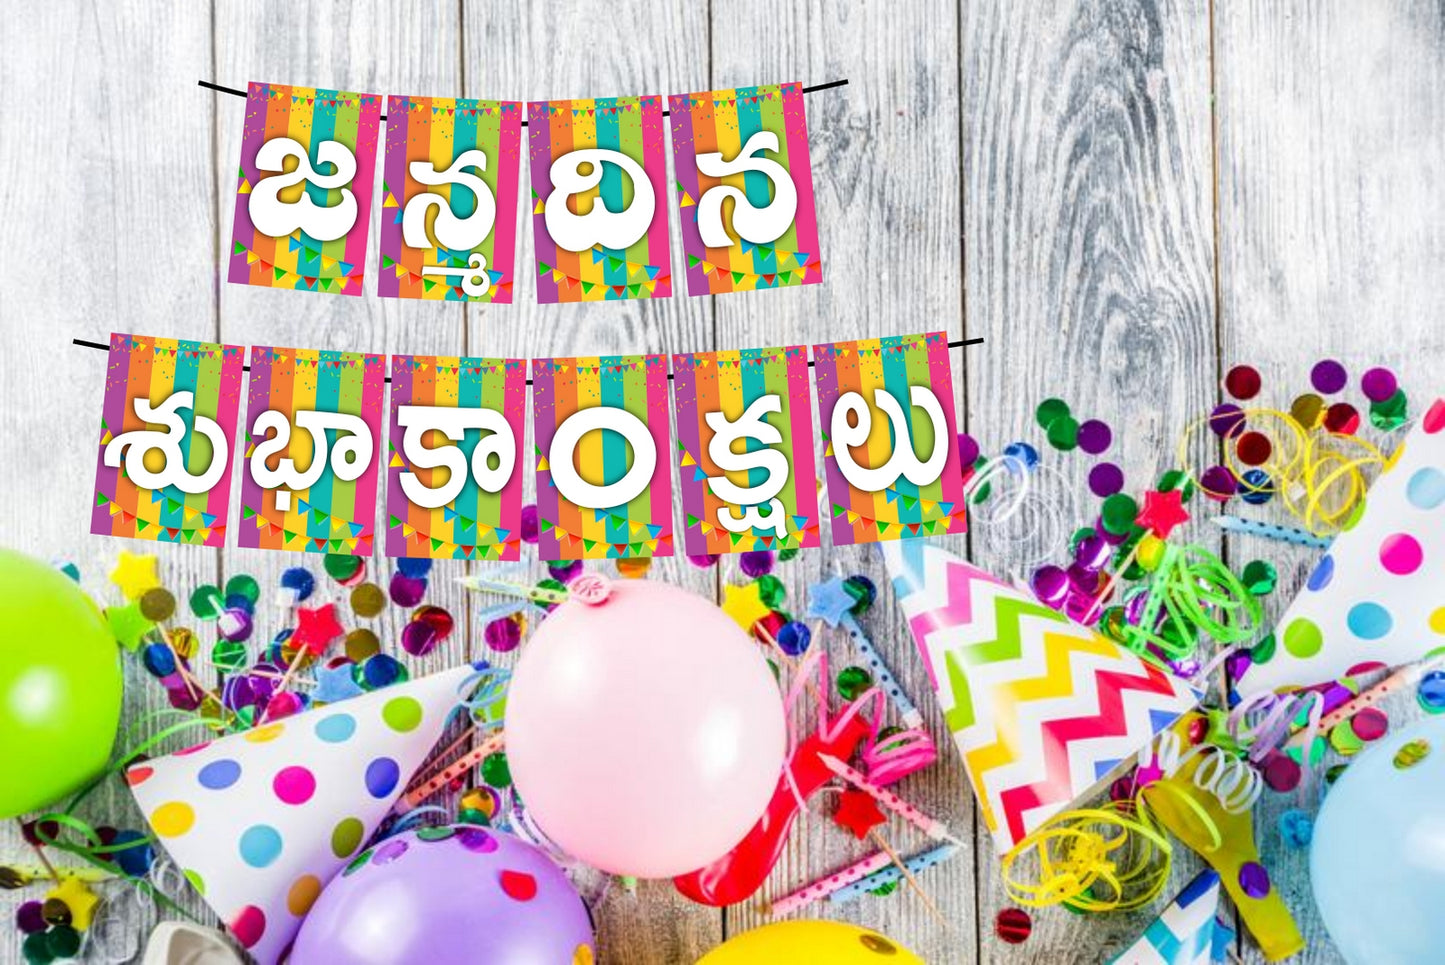 Telugu Language Happy Birthday Decoration Hanging and Banner for Photo Shoot Backdrop and Theme Party